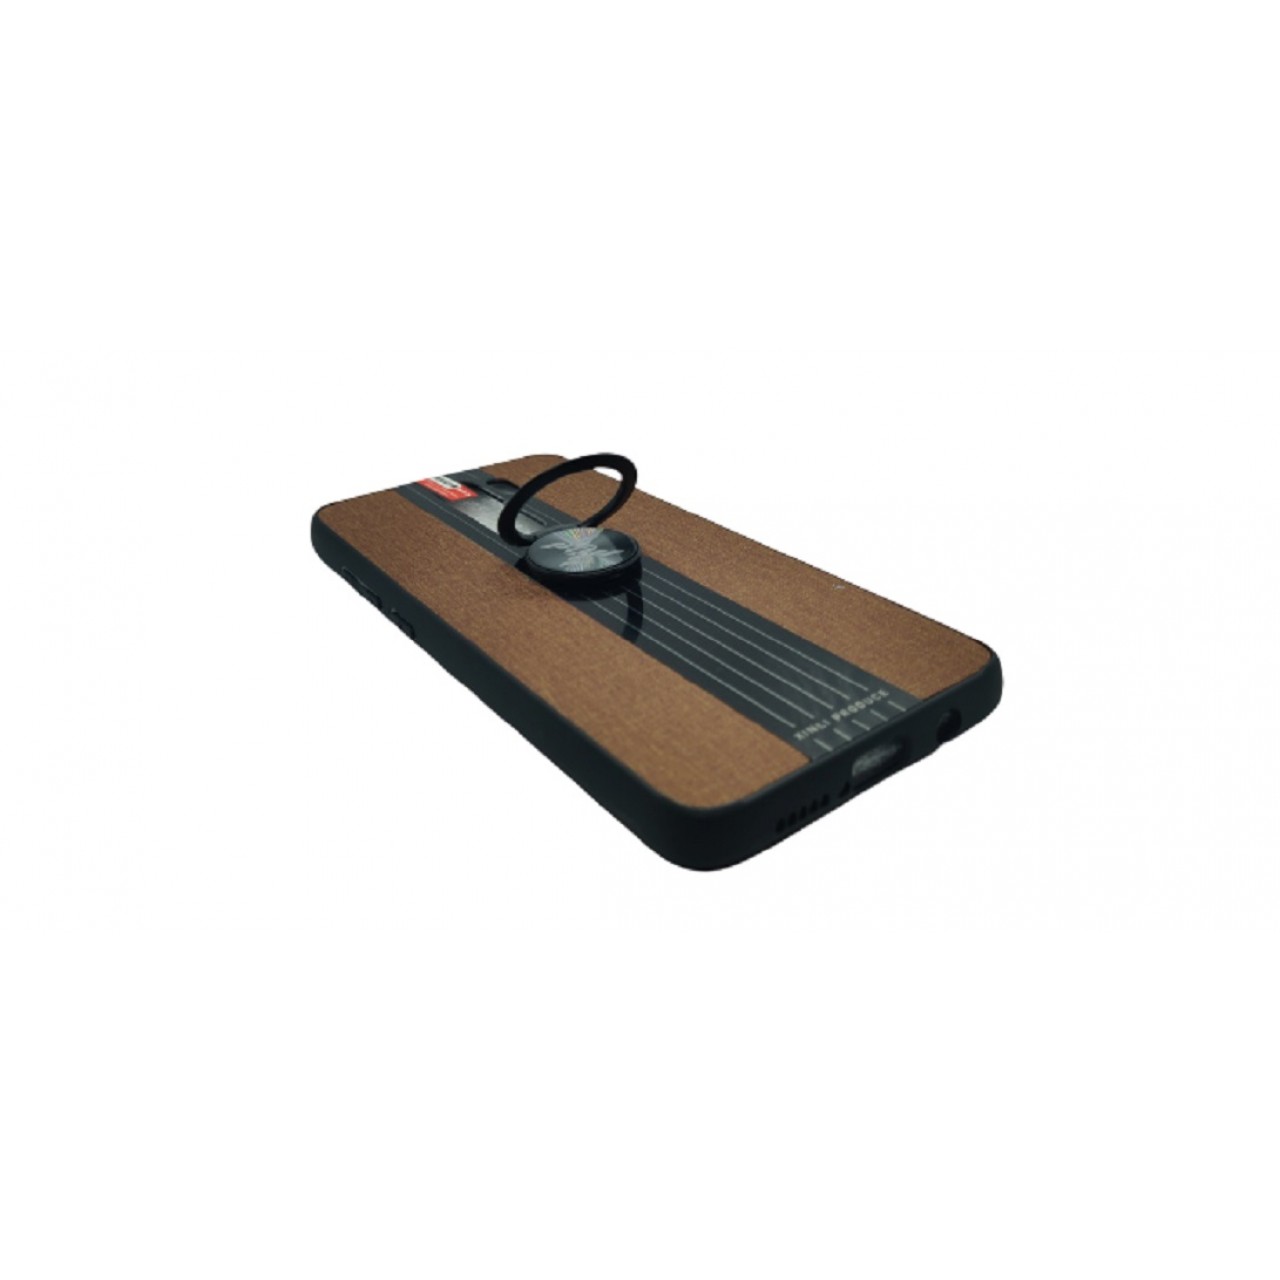 Back Case Cloth Pattern with ring for Redmi note 8 PRO Brown - Θήκη προστασίας με δαχτυλίδι στην πλάτη Καφέ - OEM